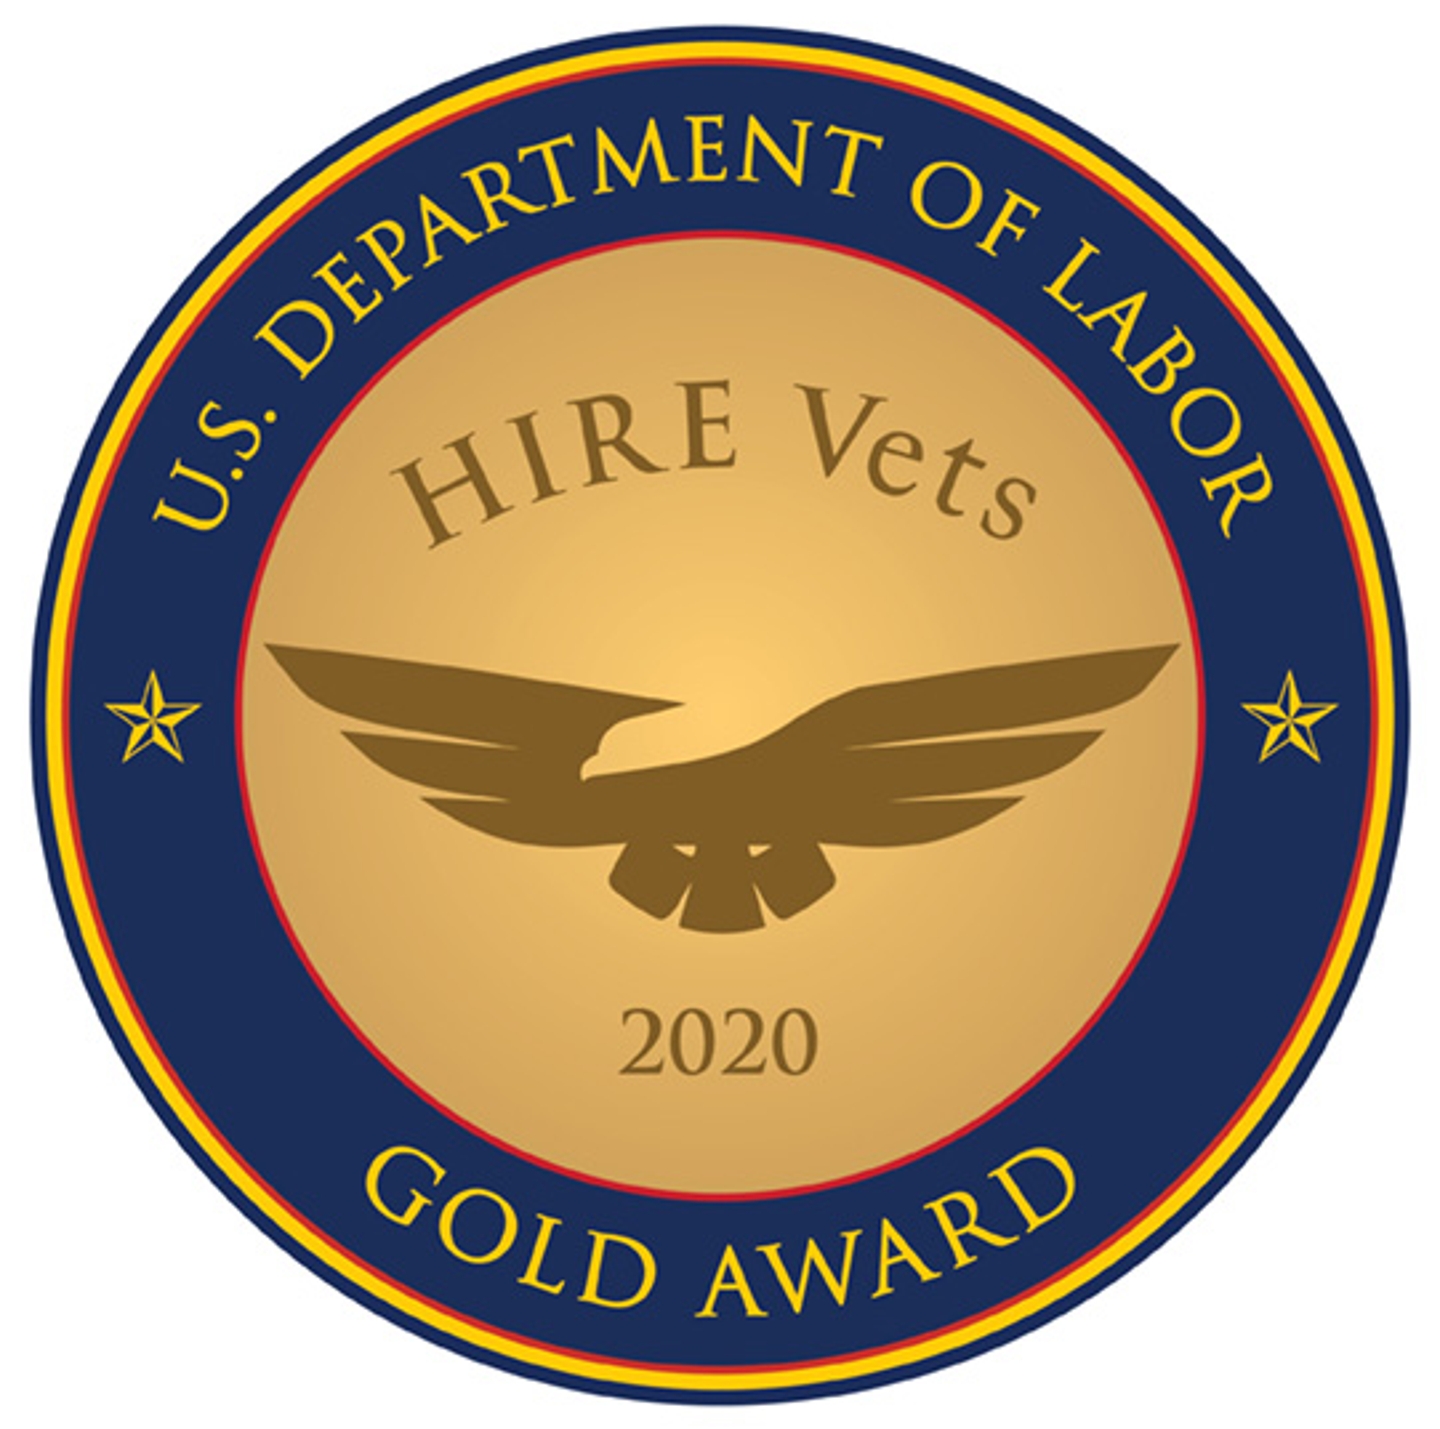 US Department of labor hire vets icon